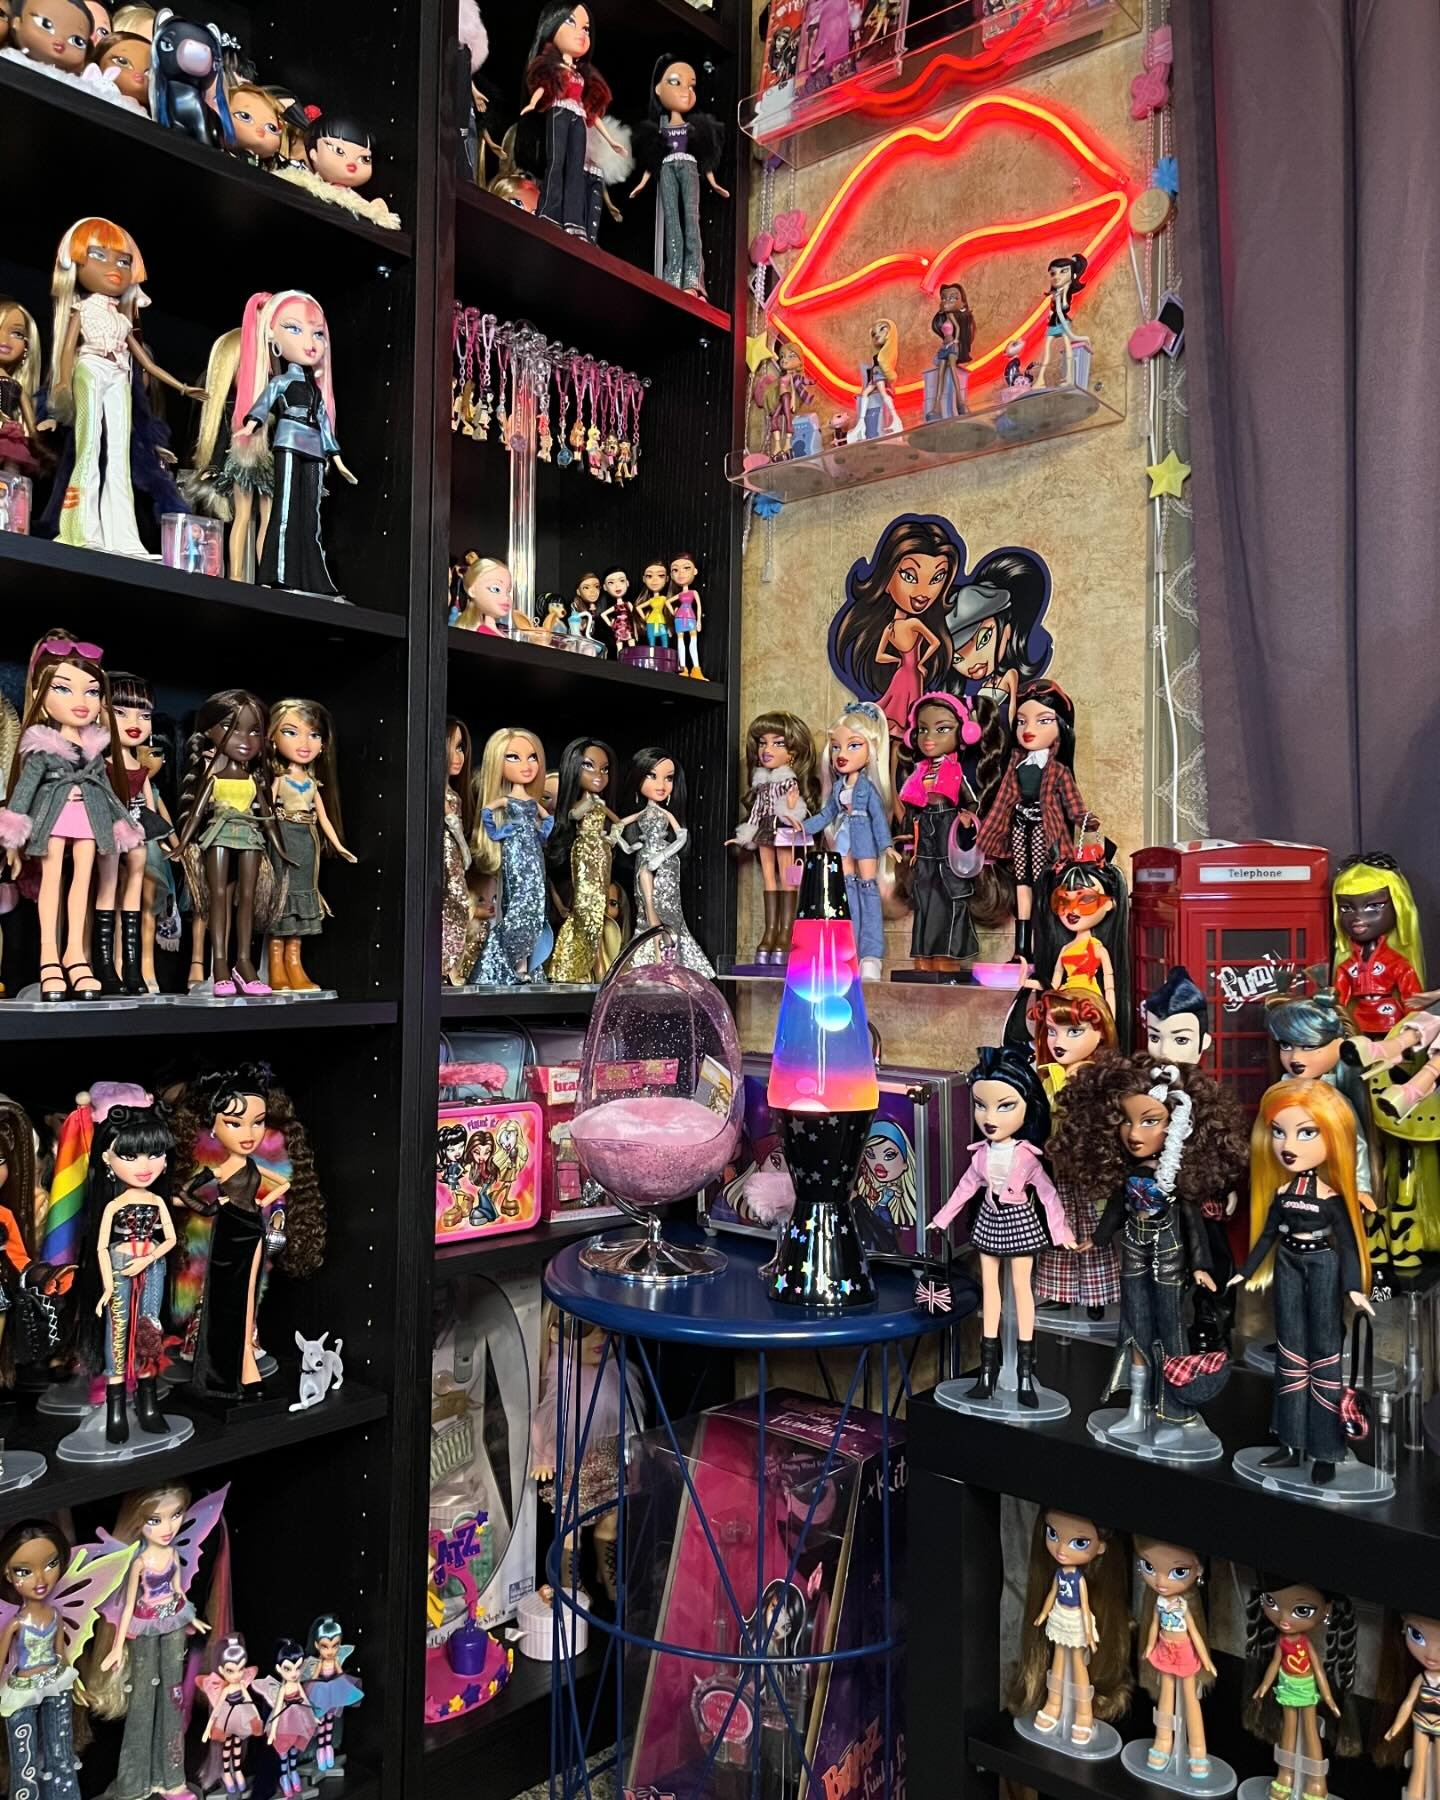 Some ✨studio✨ updates! 🥺

Excited to spruce up my Bratz corner a bit more and extra excited for all the doll content I&rsquo;m gonna make here, including an updated room/collection tour video! 💜

#LookinBratz #Bratz #BratzAesthetic #BratzFashion #B